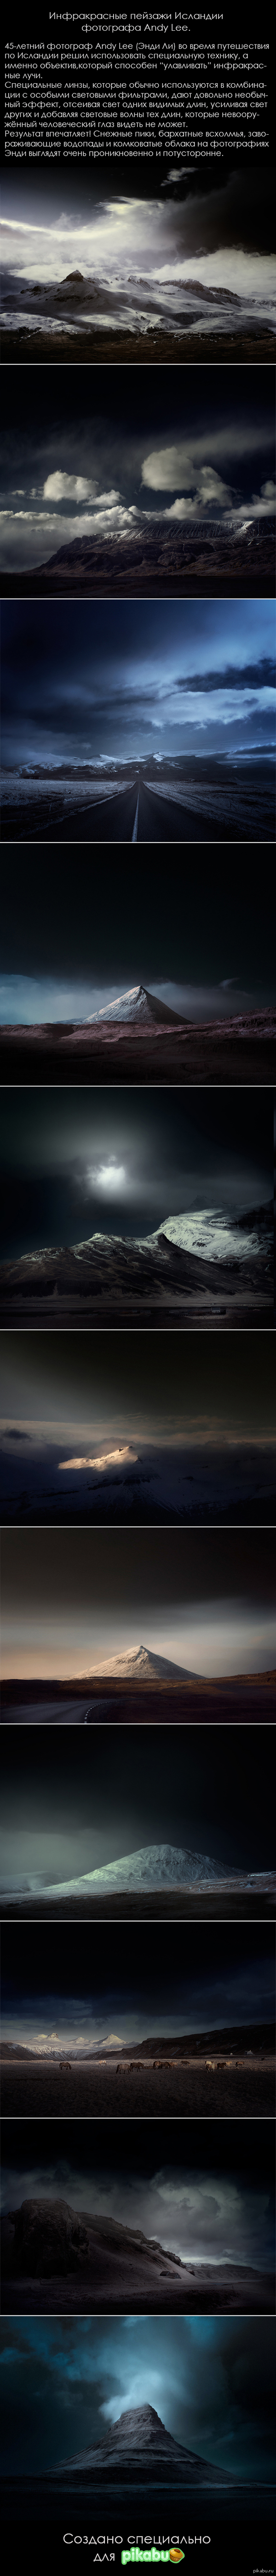 Blue Iceland by Andy Lee     Andy Lee